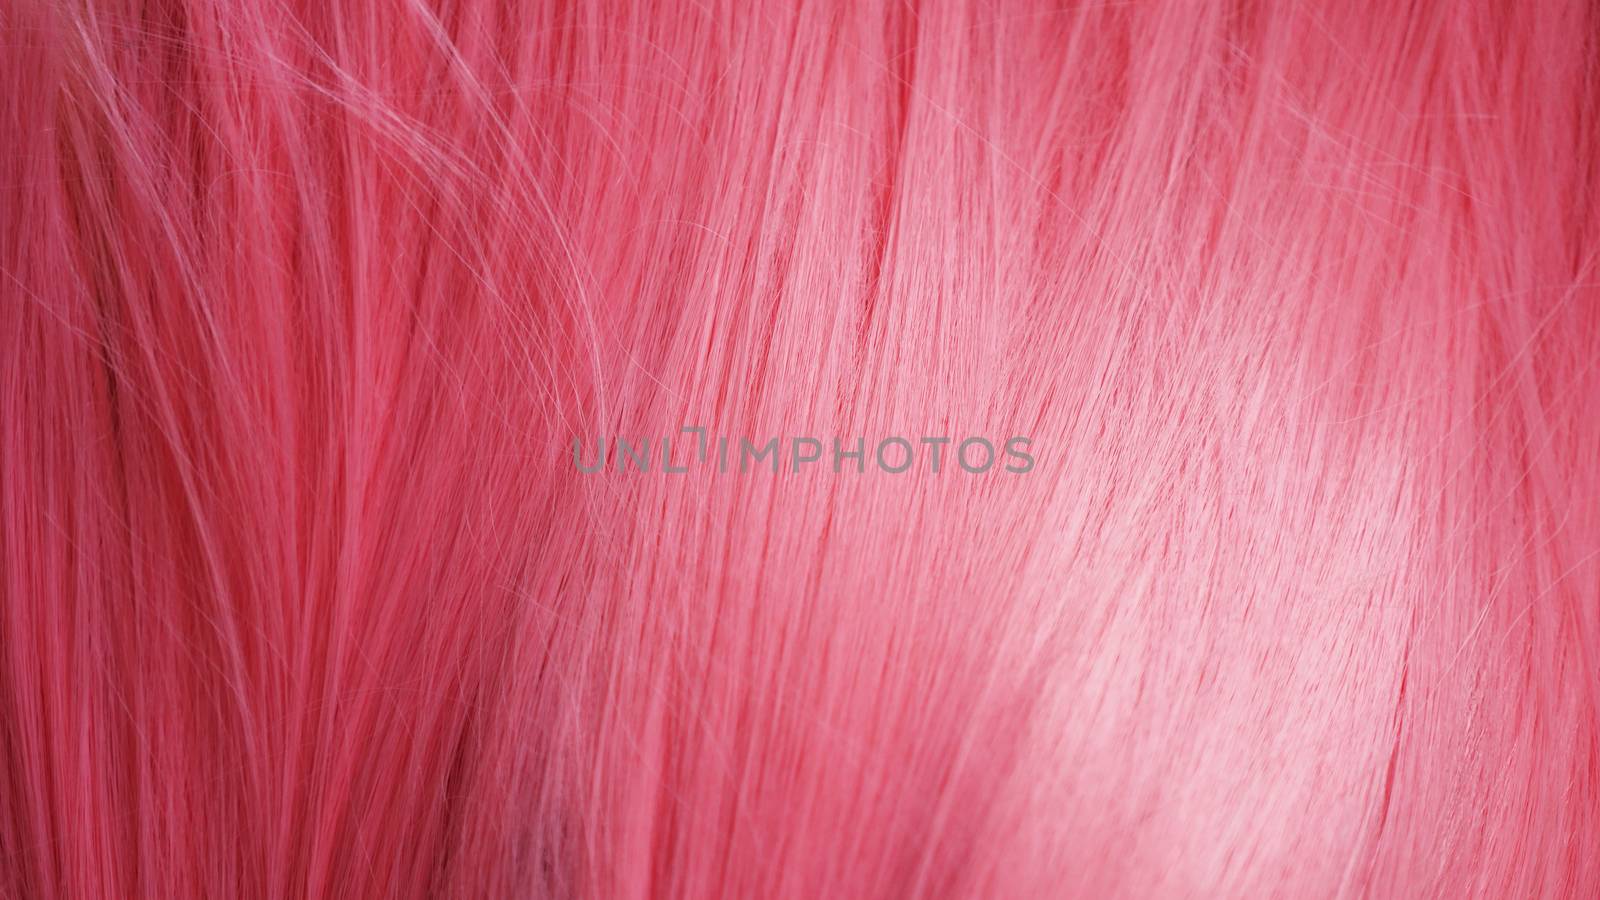 Pink Hair wig Closeup texture. May be used as background